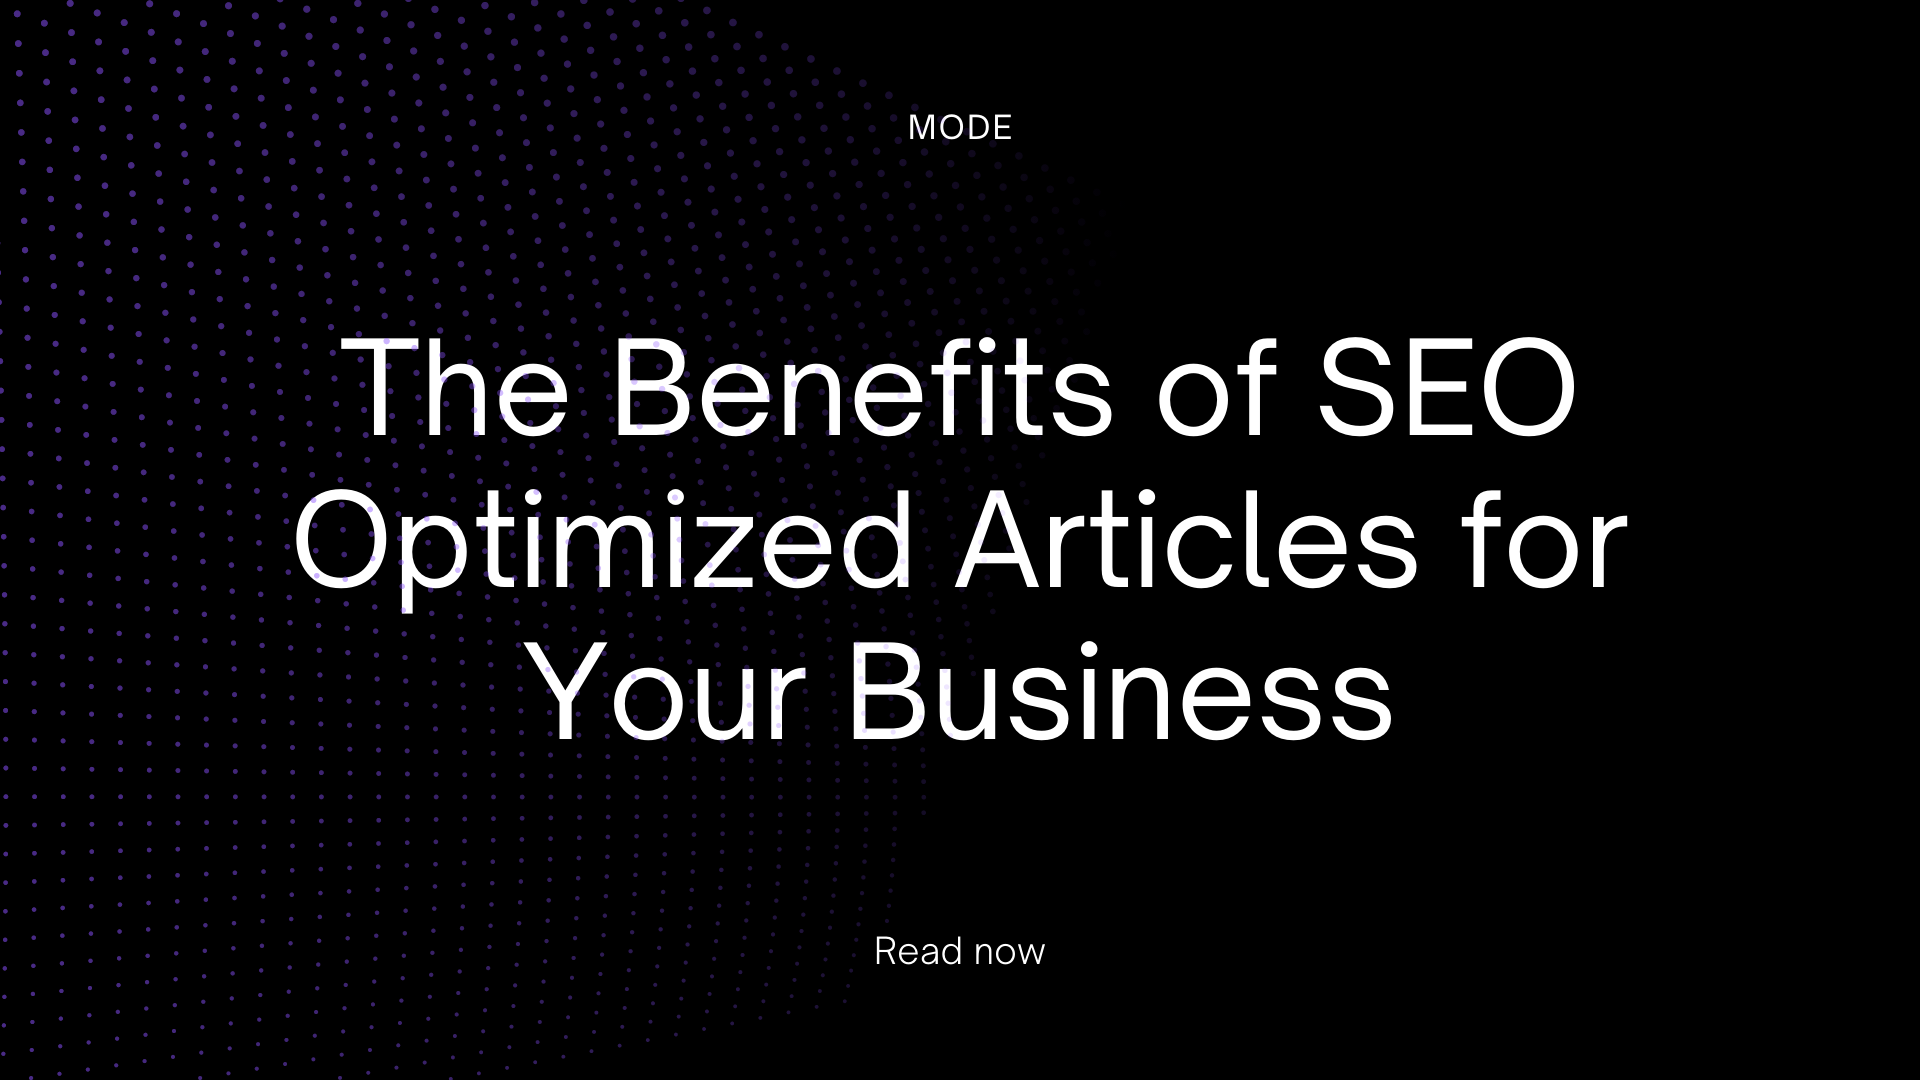 The Benefits of SEO Optimized Articles for Your Business